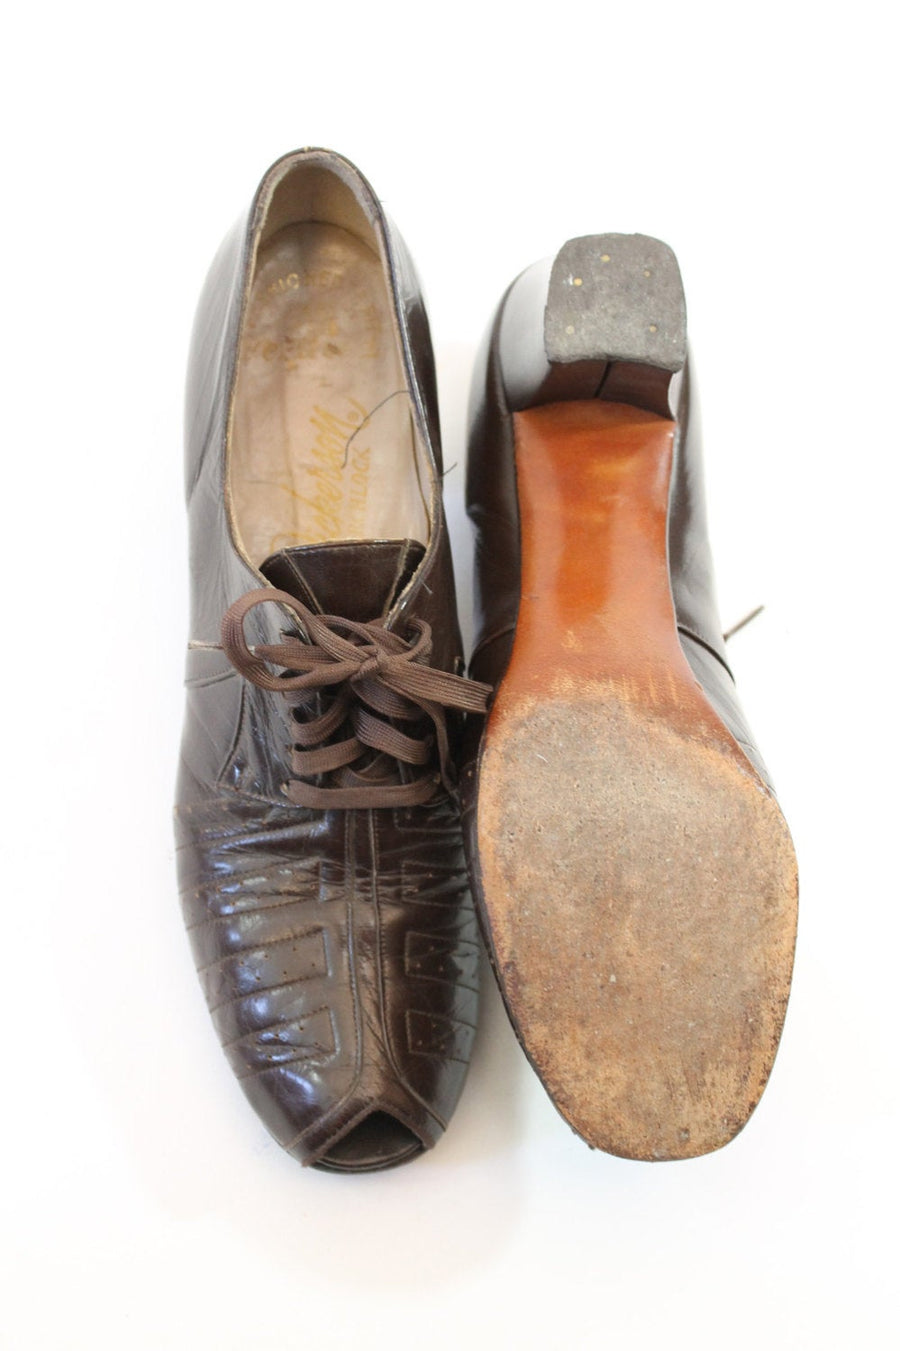 1930s oxford shoes peeptoe laceup heels size 7 | new fall